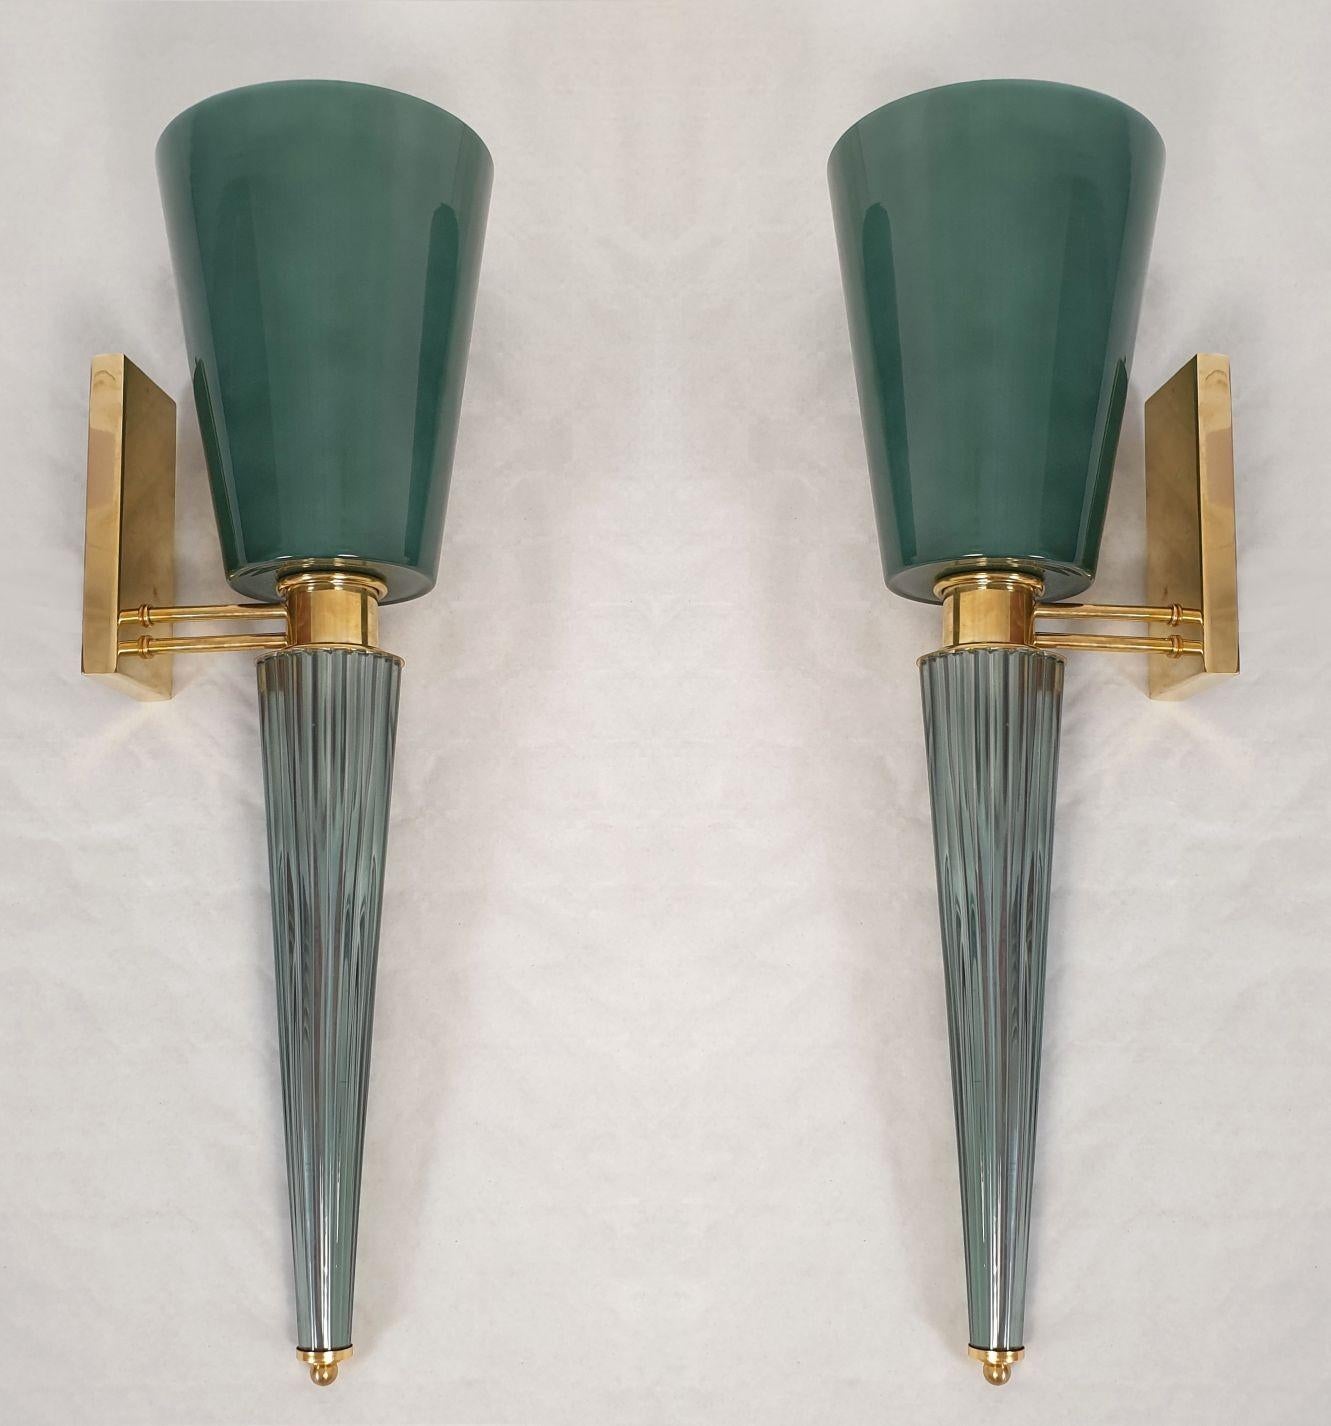 Pair of tall Murano glass and brass wall sconces, Attributed to Venini, Italy 1970s.
The Mid-Century Modern sconces are made of a top green Murano glass vase nesting the light bulb.
The glass is double layered: the inside is white. It's translucent,